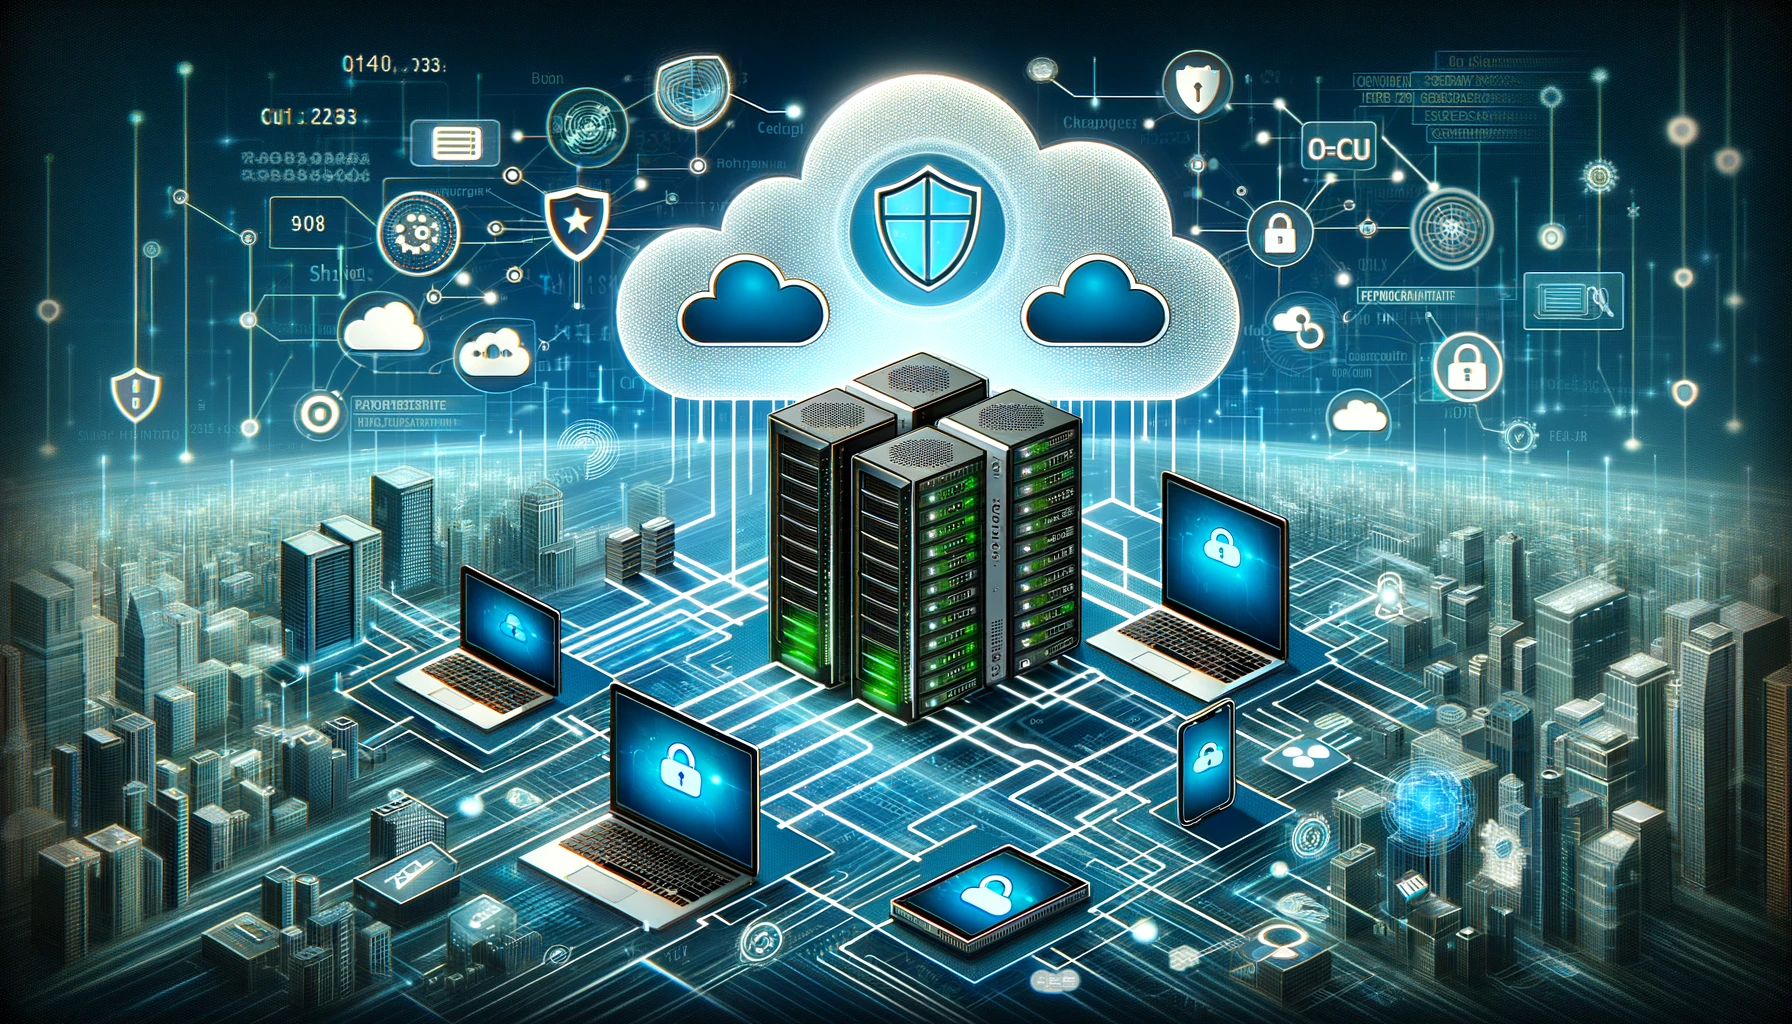 How are cloud technologies changing the cyber security landscape?